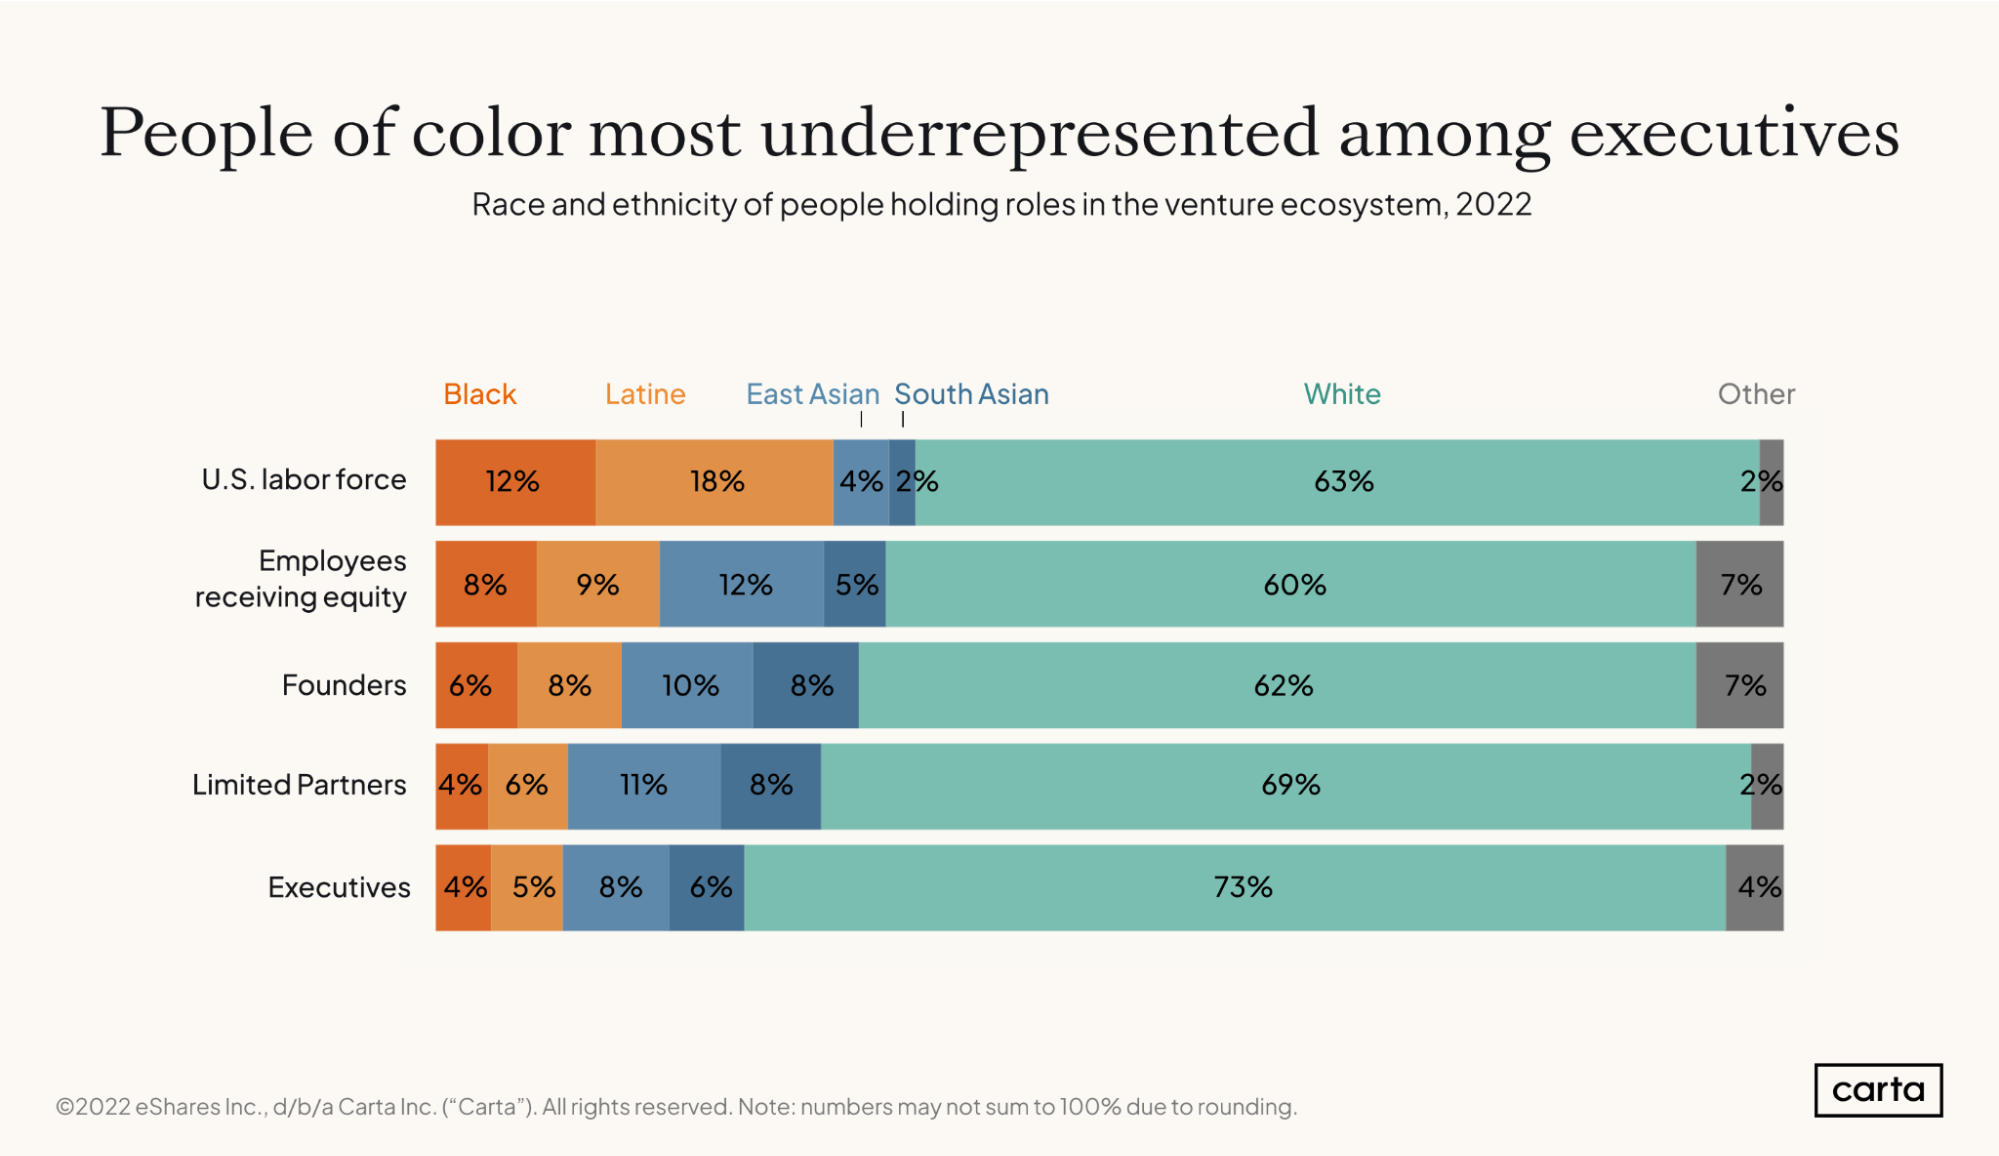 People of color most underrepresented among executives: Race and ethnicity of people holding roles in the venture ecosystem, 2022. A stacked bar chart with five bars, representing the U.S. labor force, employees receiving equity, founders, limited partners, and executives. These are in order of the percentage who are people of color. The U.S. labor force has the smallest percentage who are white (63%) and the largest percentage who are Black or Latine (12% and 18%), and Executives have the largest percentage who are white and the lowest who are Black and Latine.